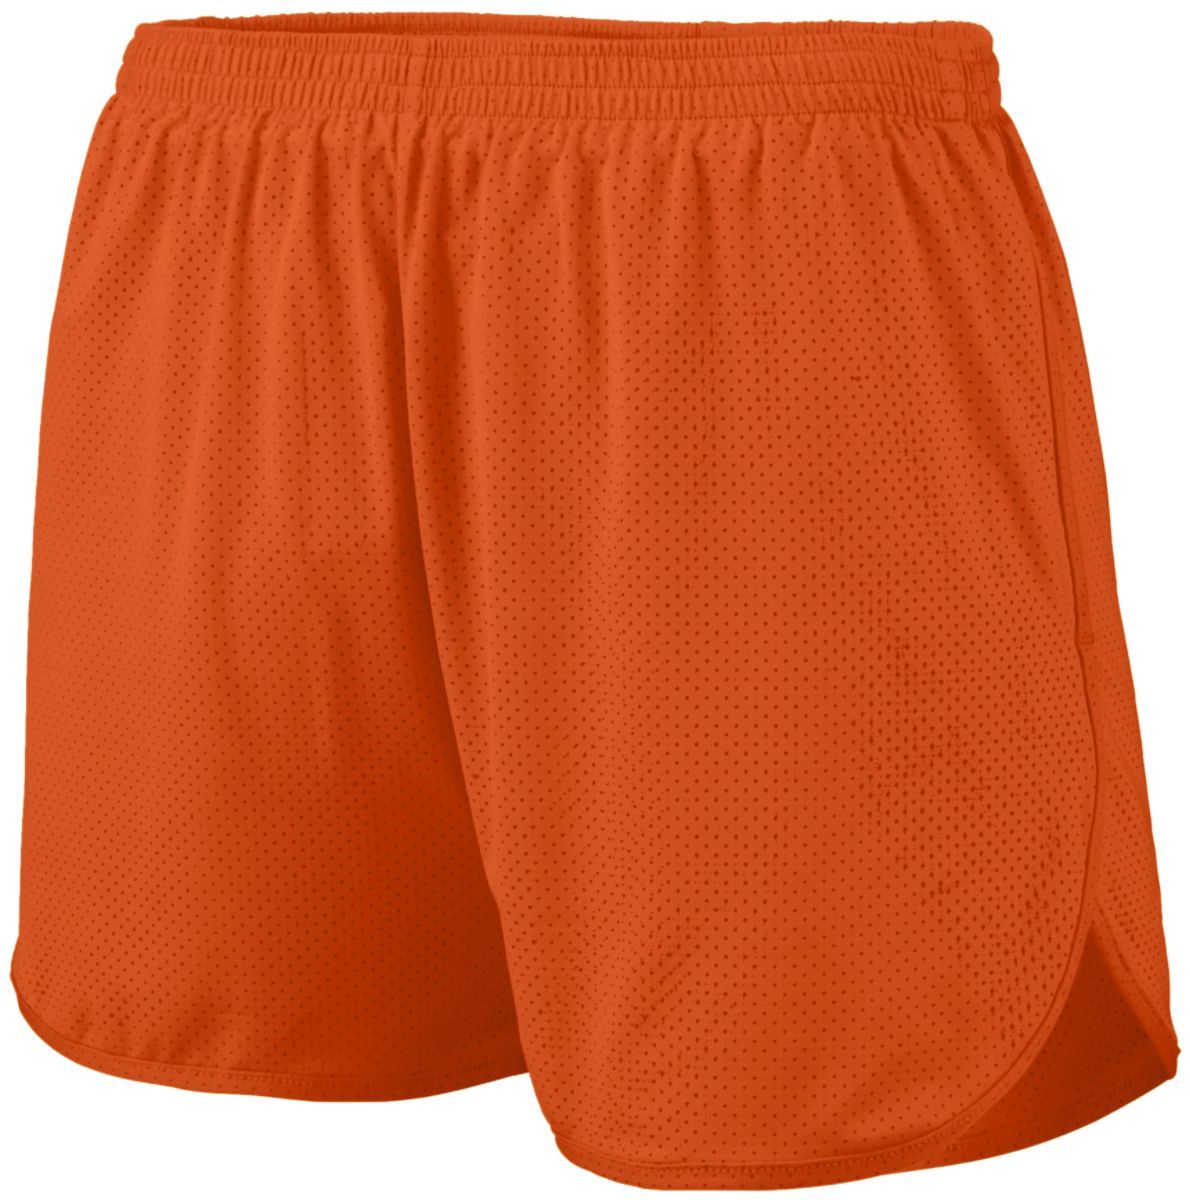 Augusta Sportswear Solid Split Shorts in Orange  -Part of the Adult, Adult-Shorts, Augusta-Products, Track-Field product lines at KanaleyCreations.com